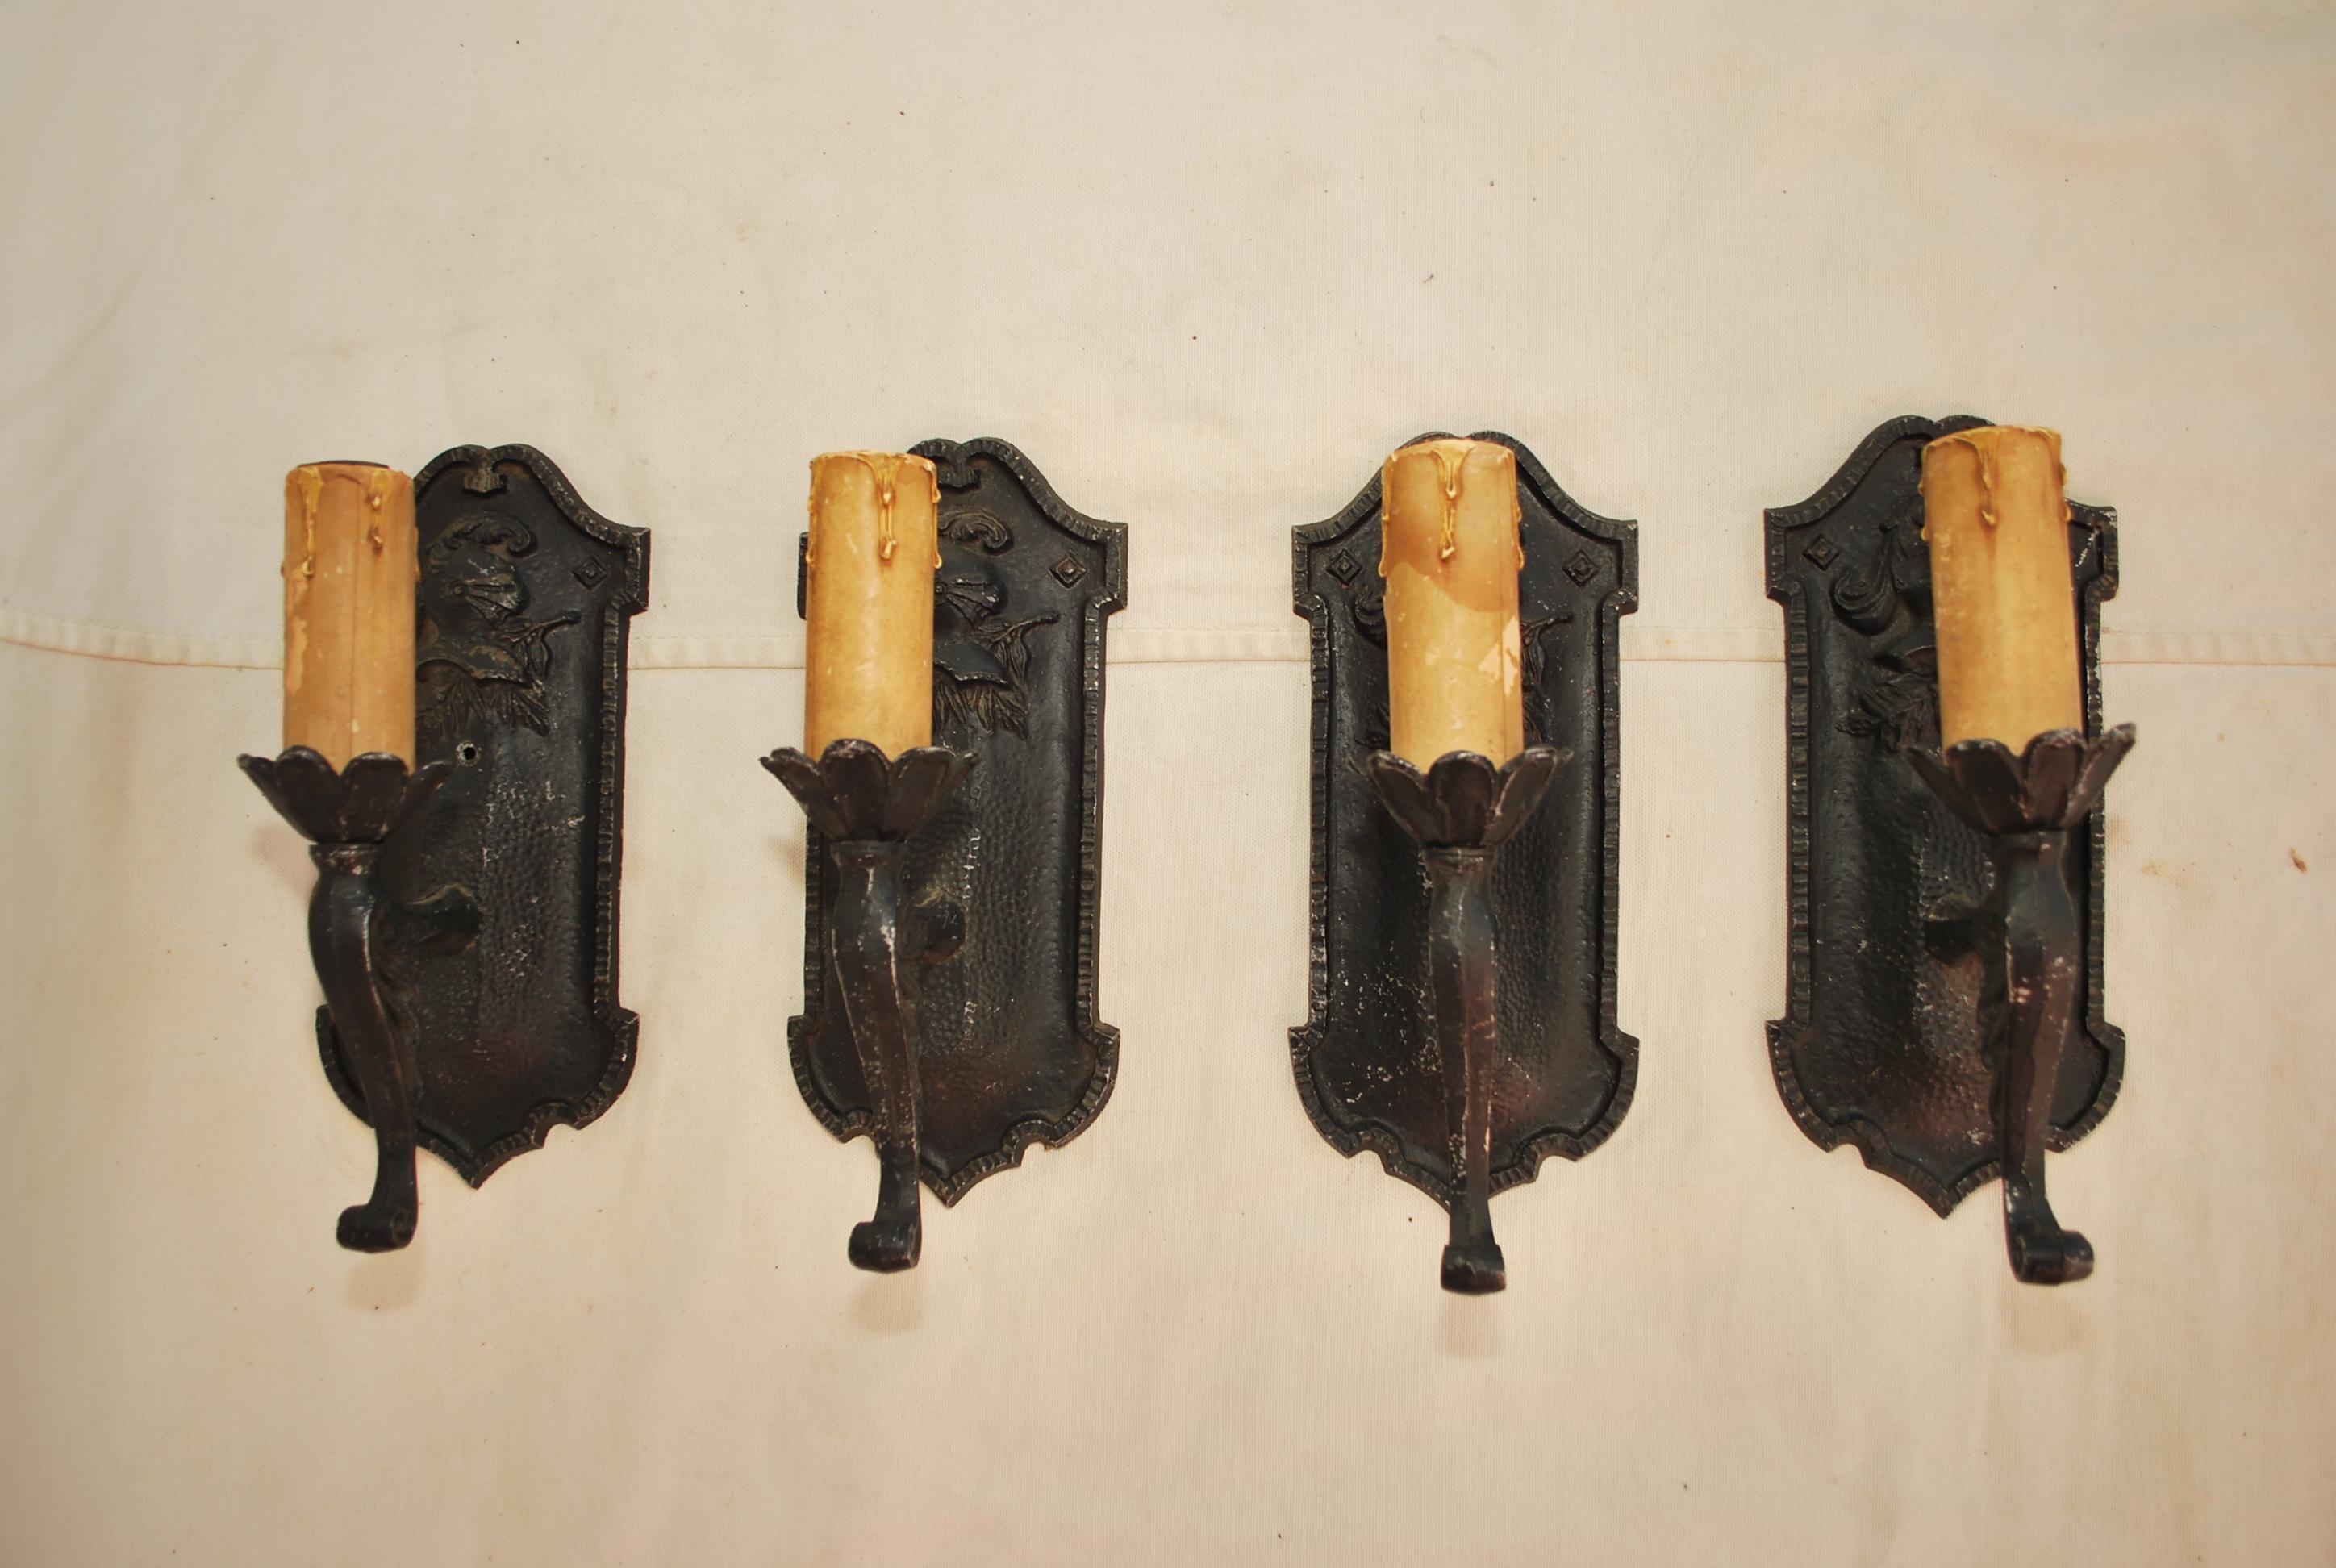 A beautiful set of four 1920's sconces, the patina is allot nicer in person, perfect for a Spanish or Tudor style.